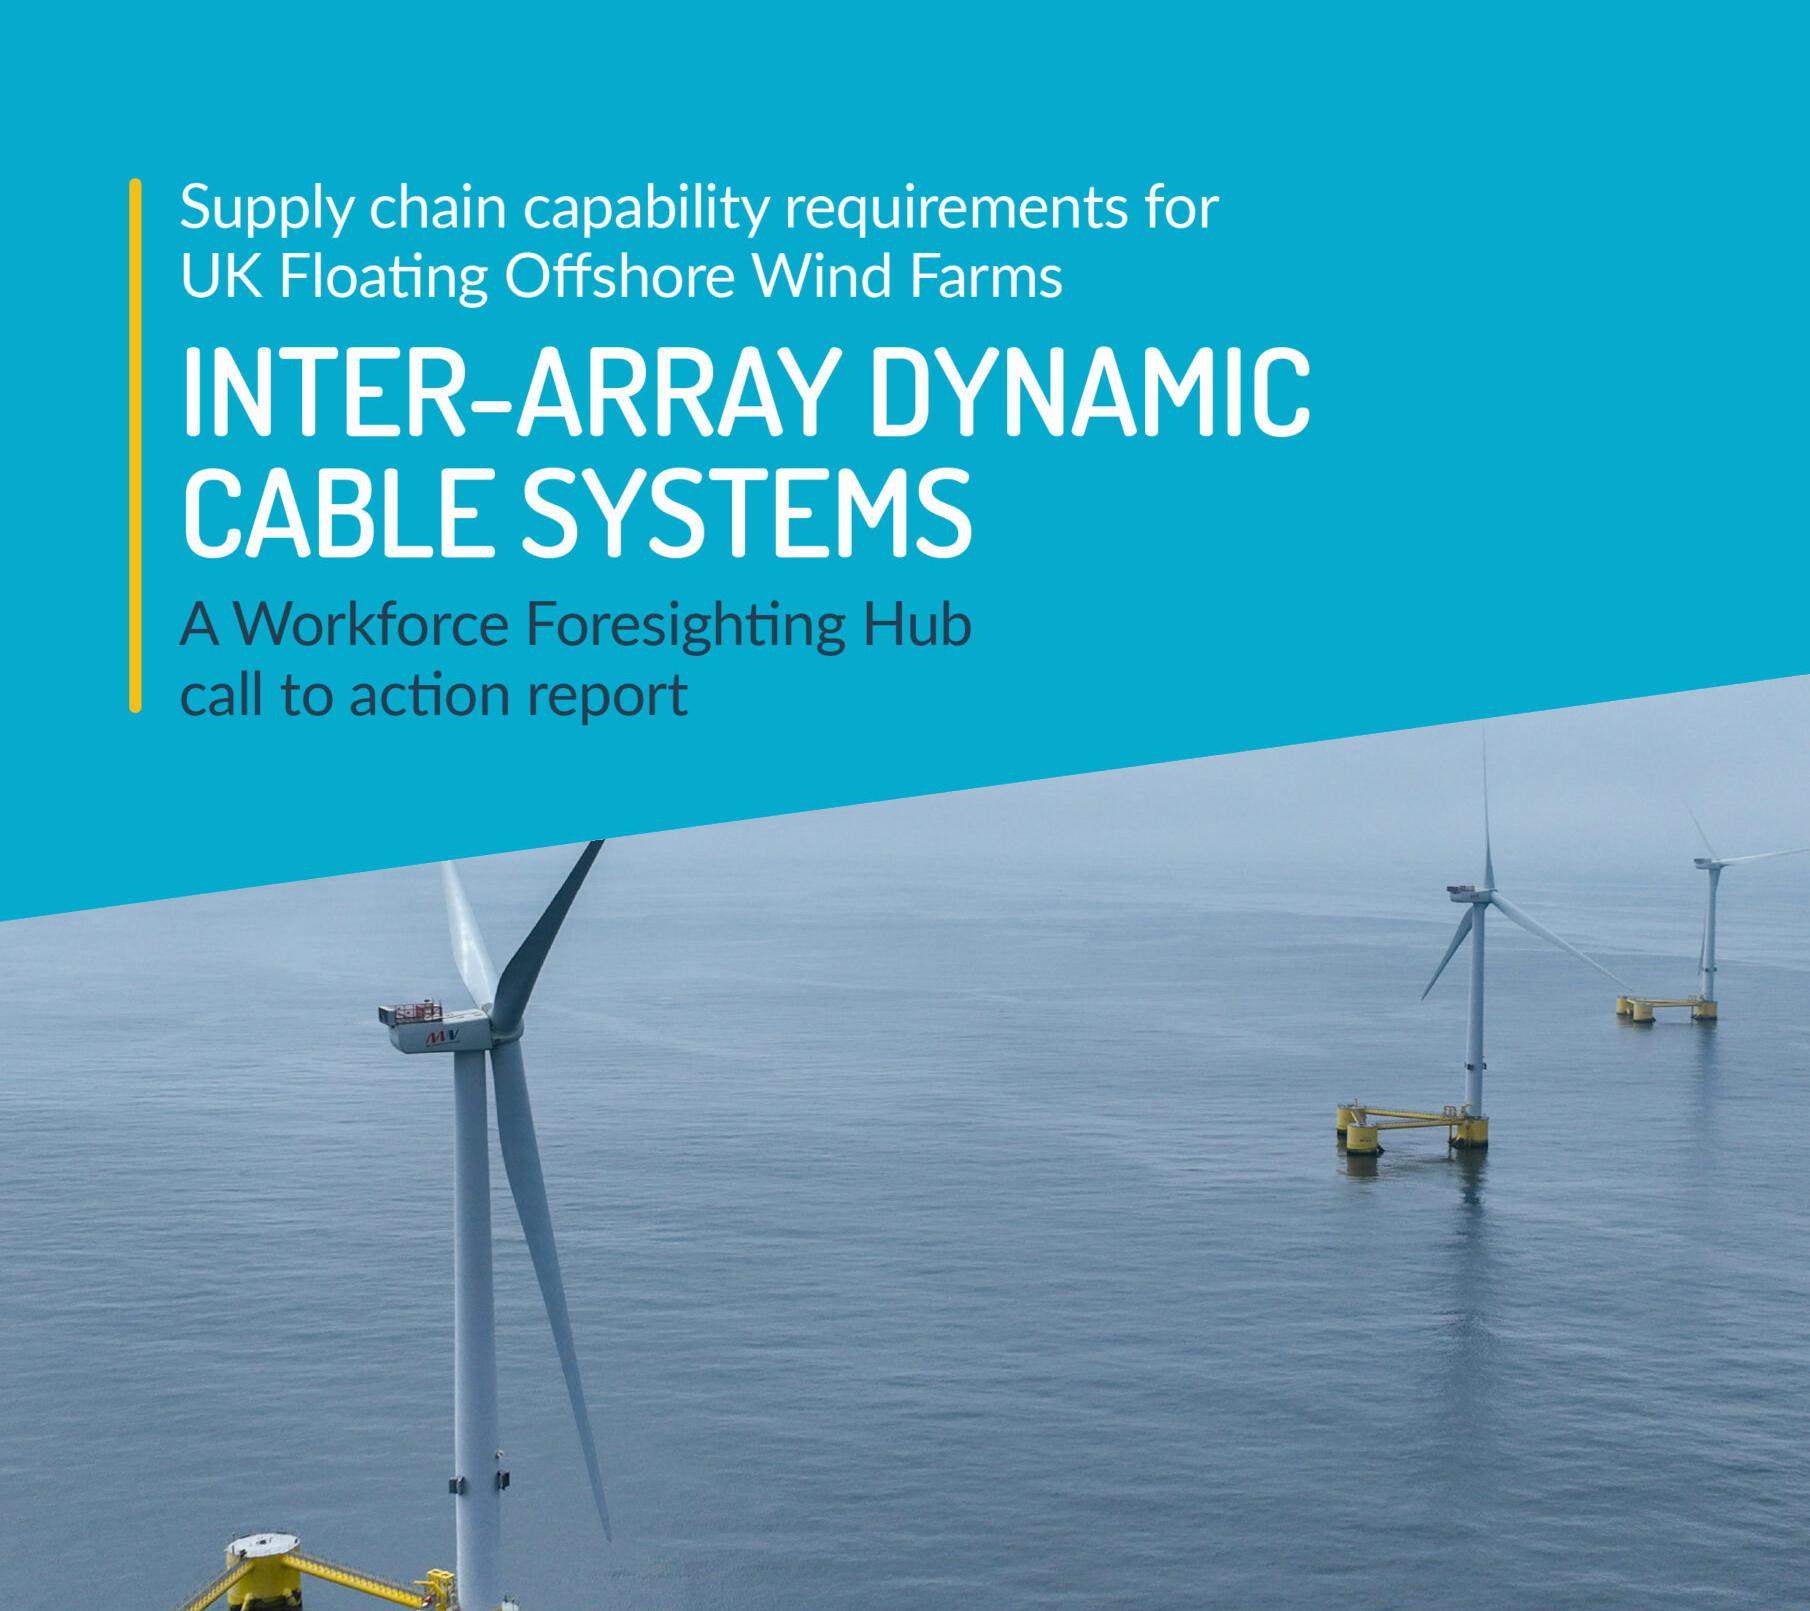 Supply chain capability requirements for UK Floating Offshore Wind Farms